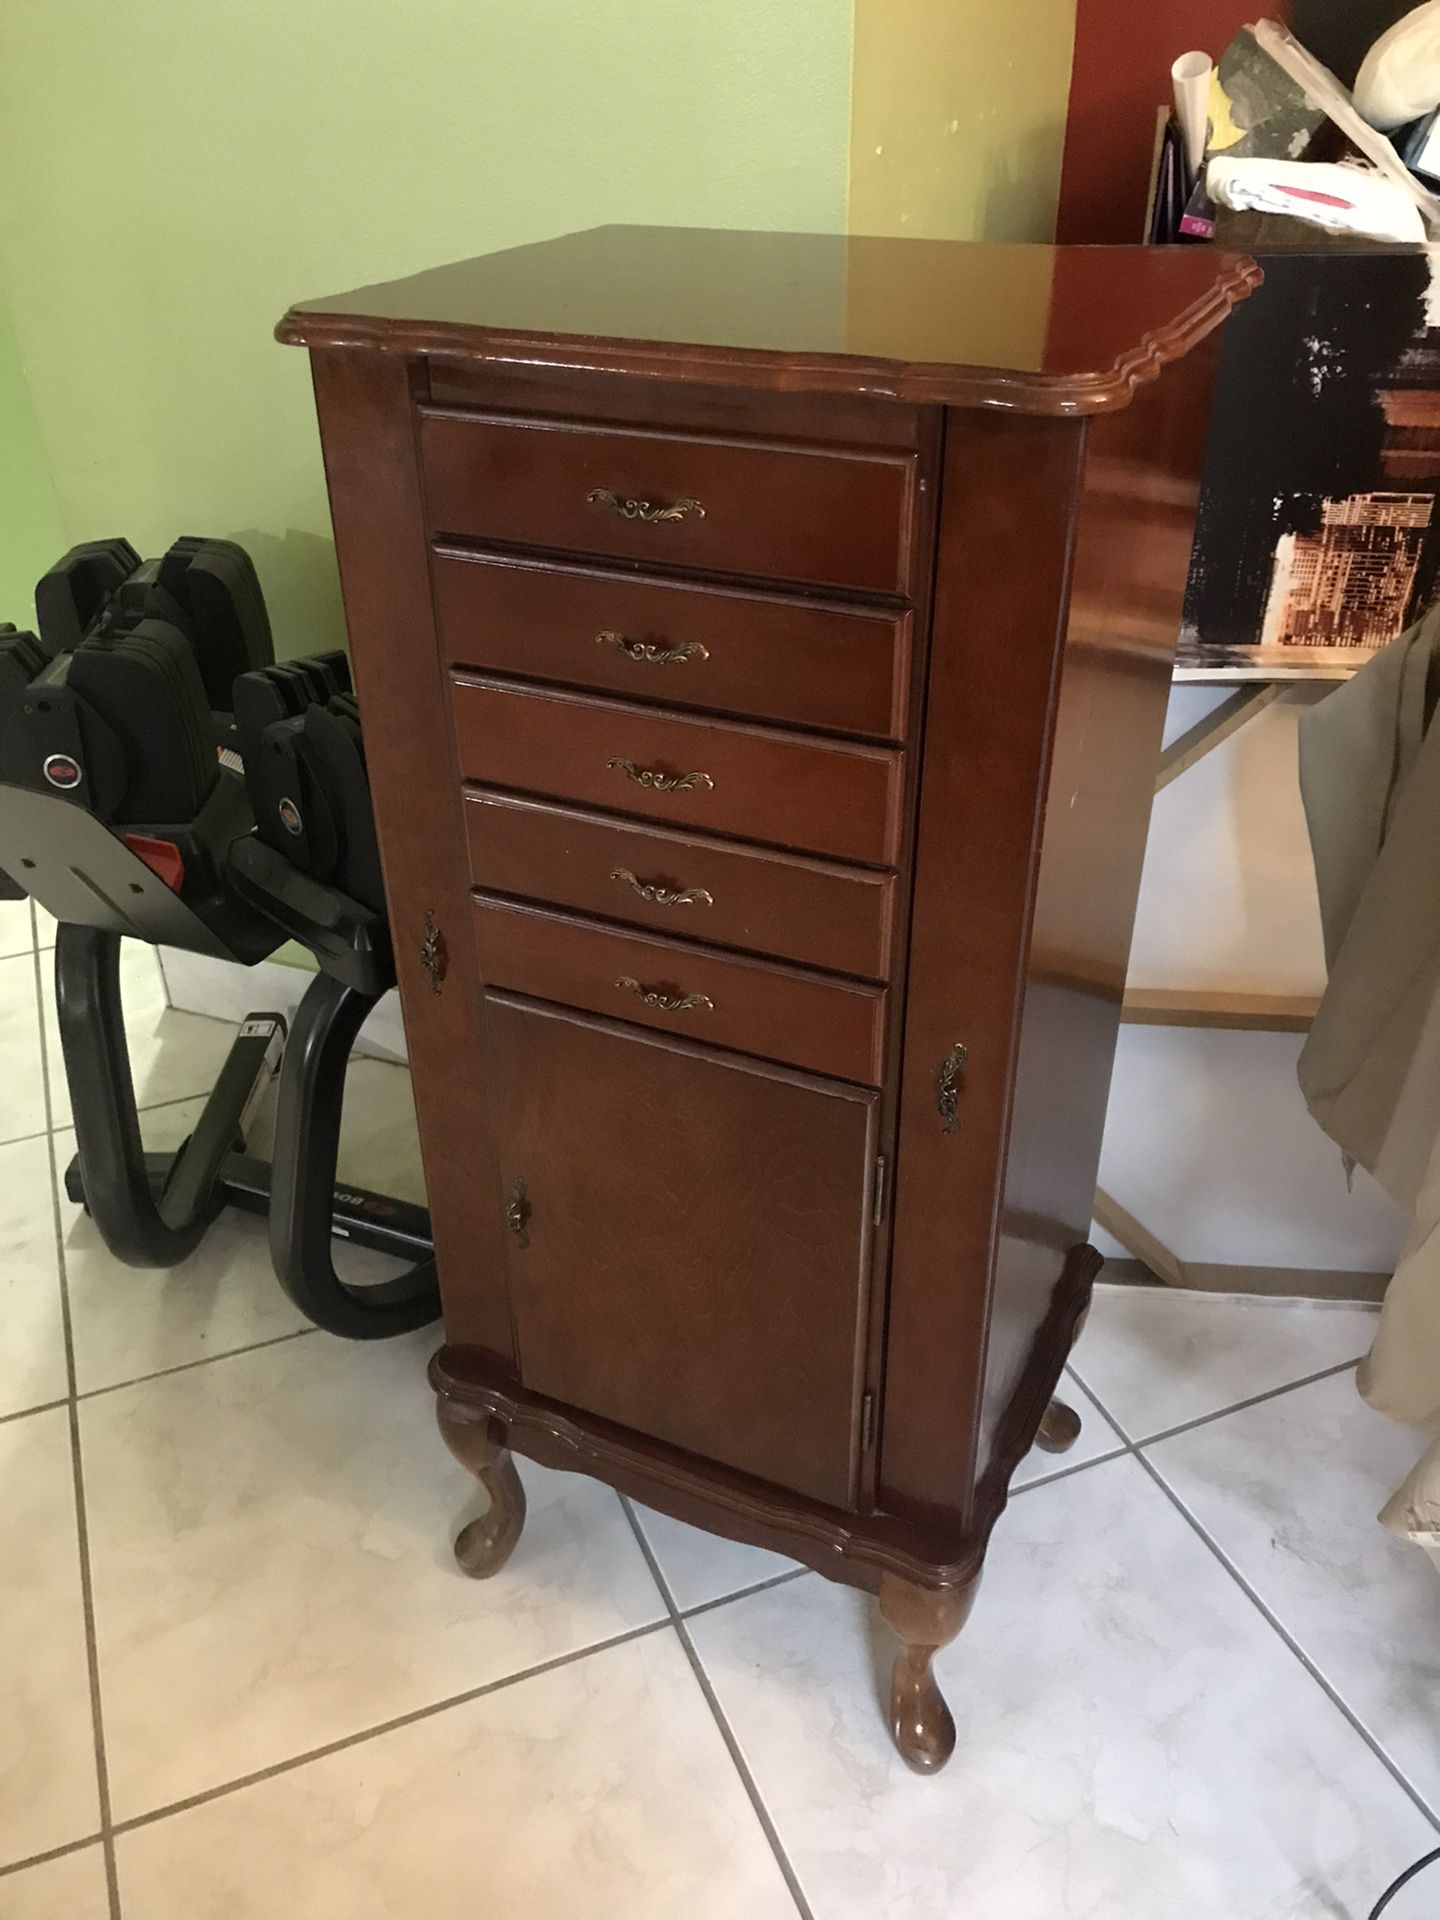 NOT FREE!! Jewelry Box furniture $45 Today